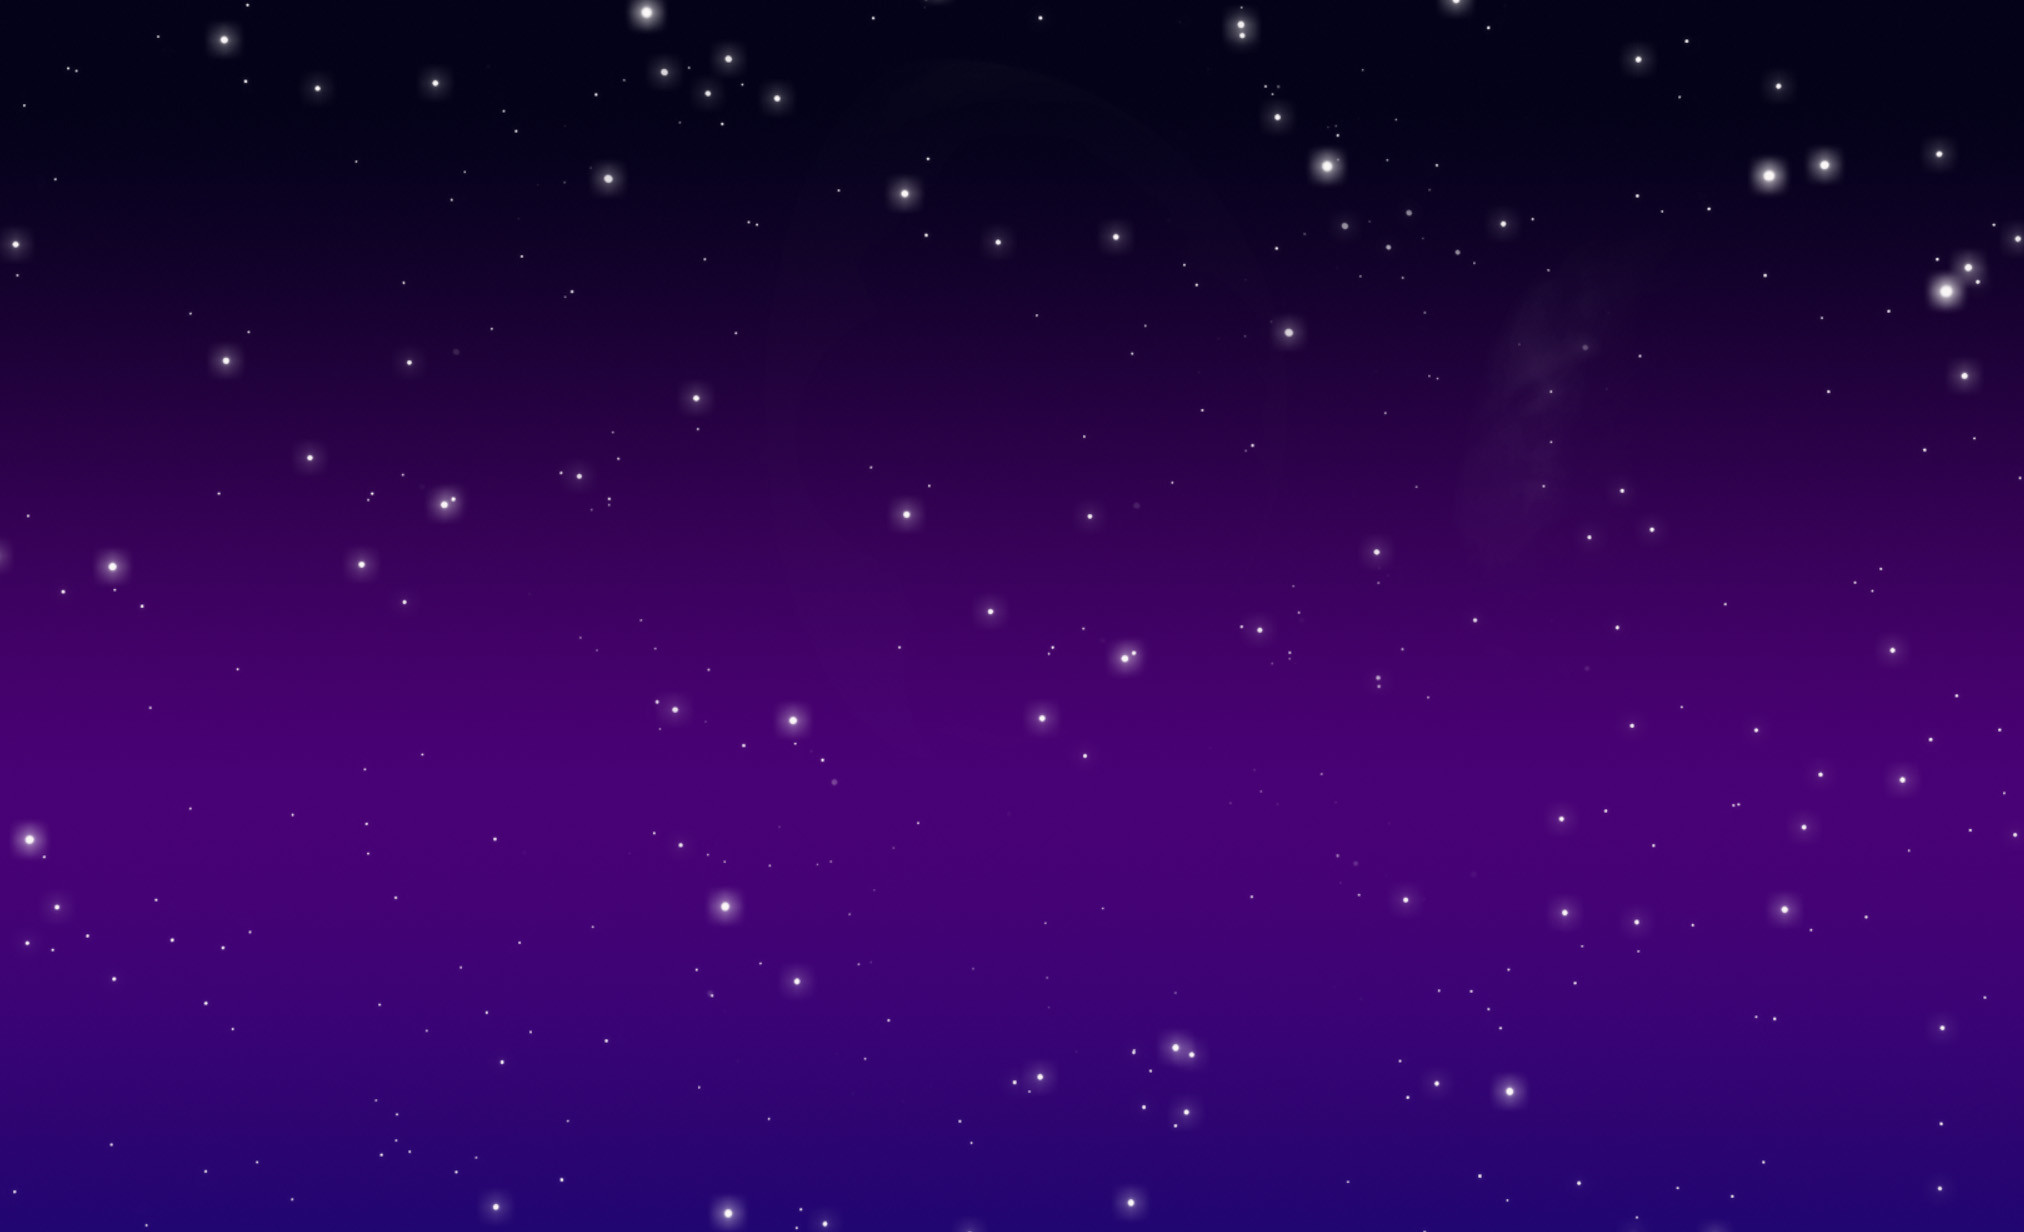 2024x1232 ... FREE:Purple Space Background by Magical-Mama